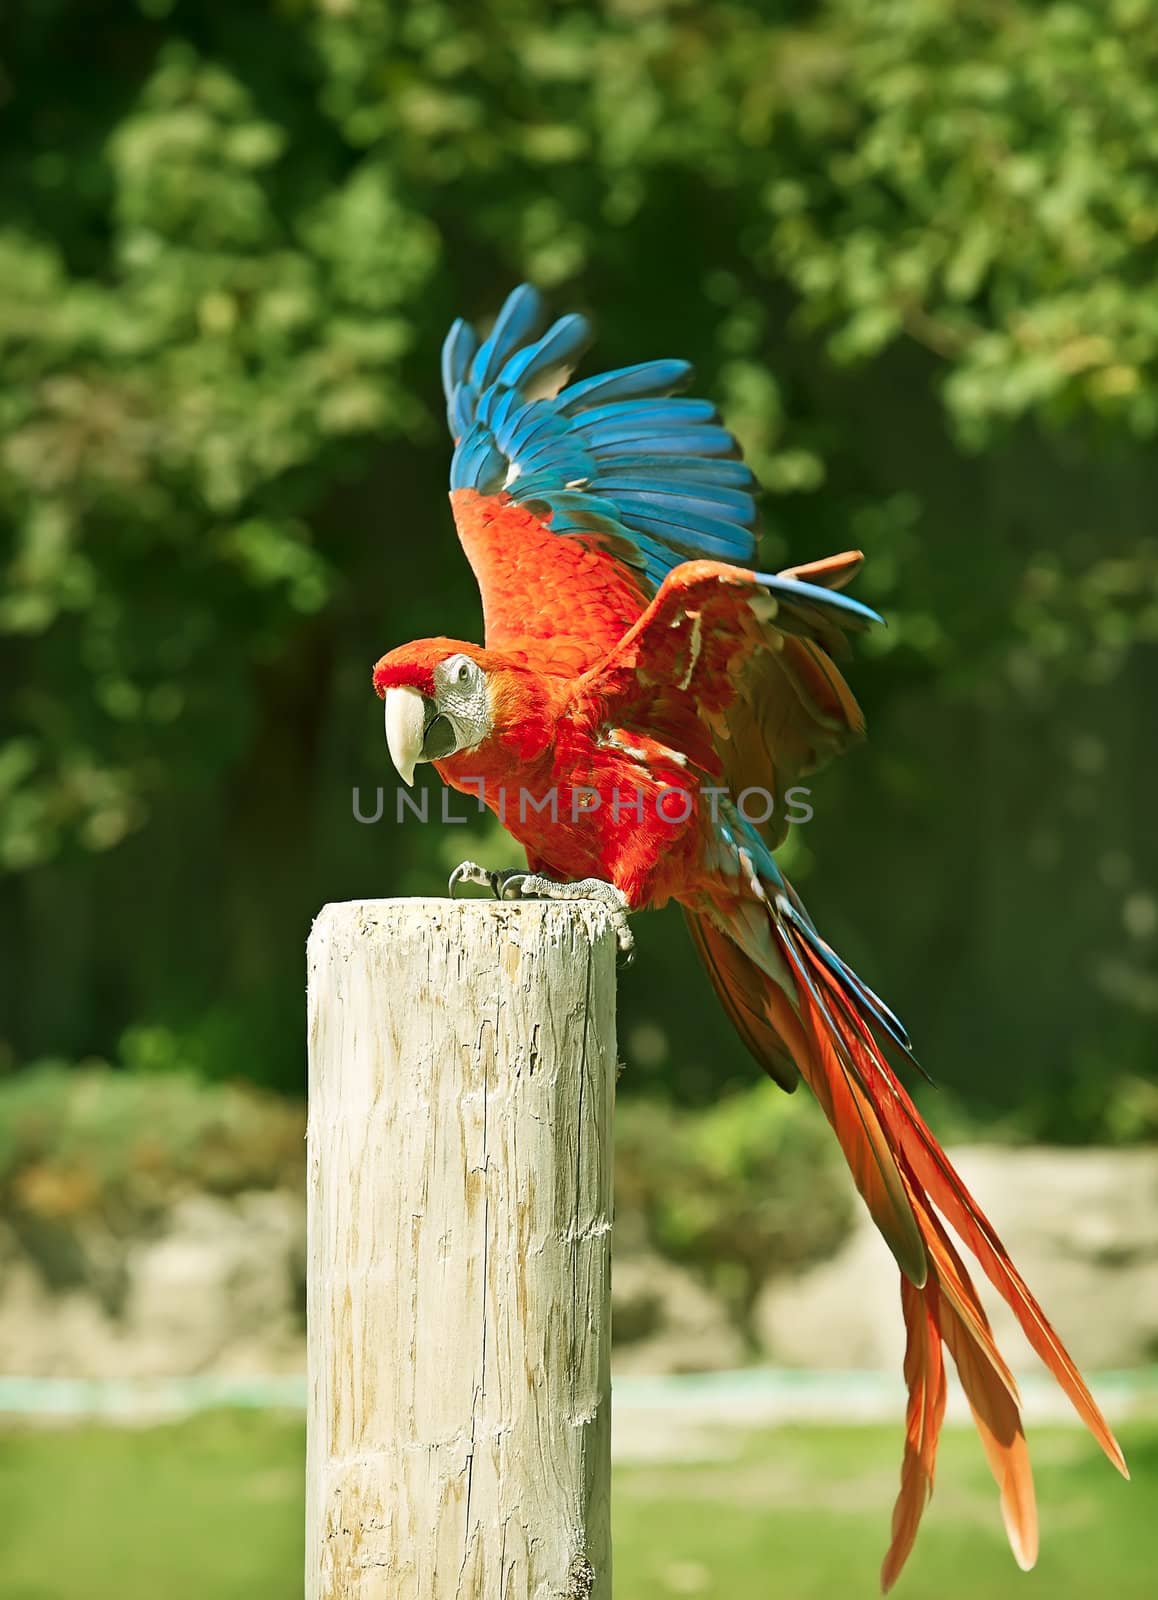 Macaw red parrot portrait by Marcus